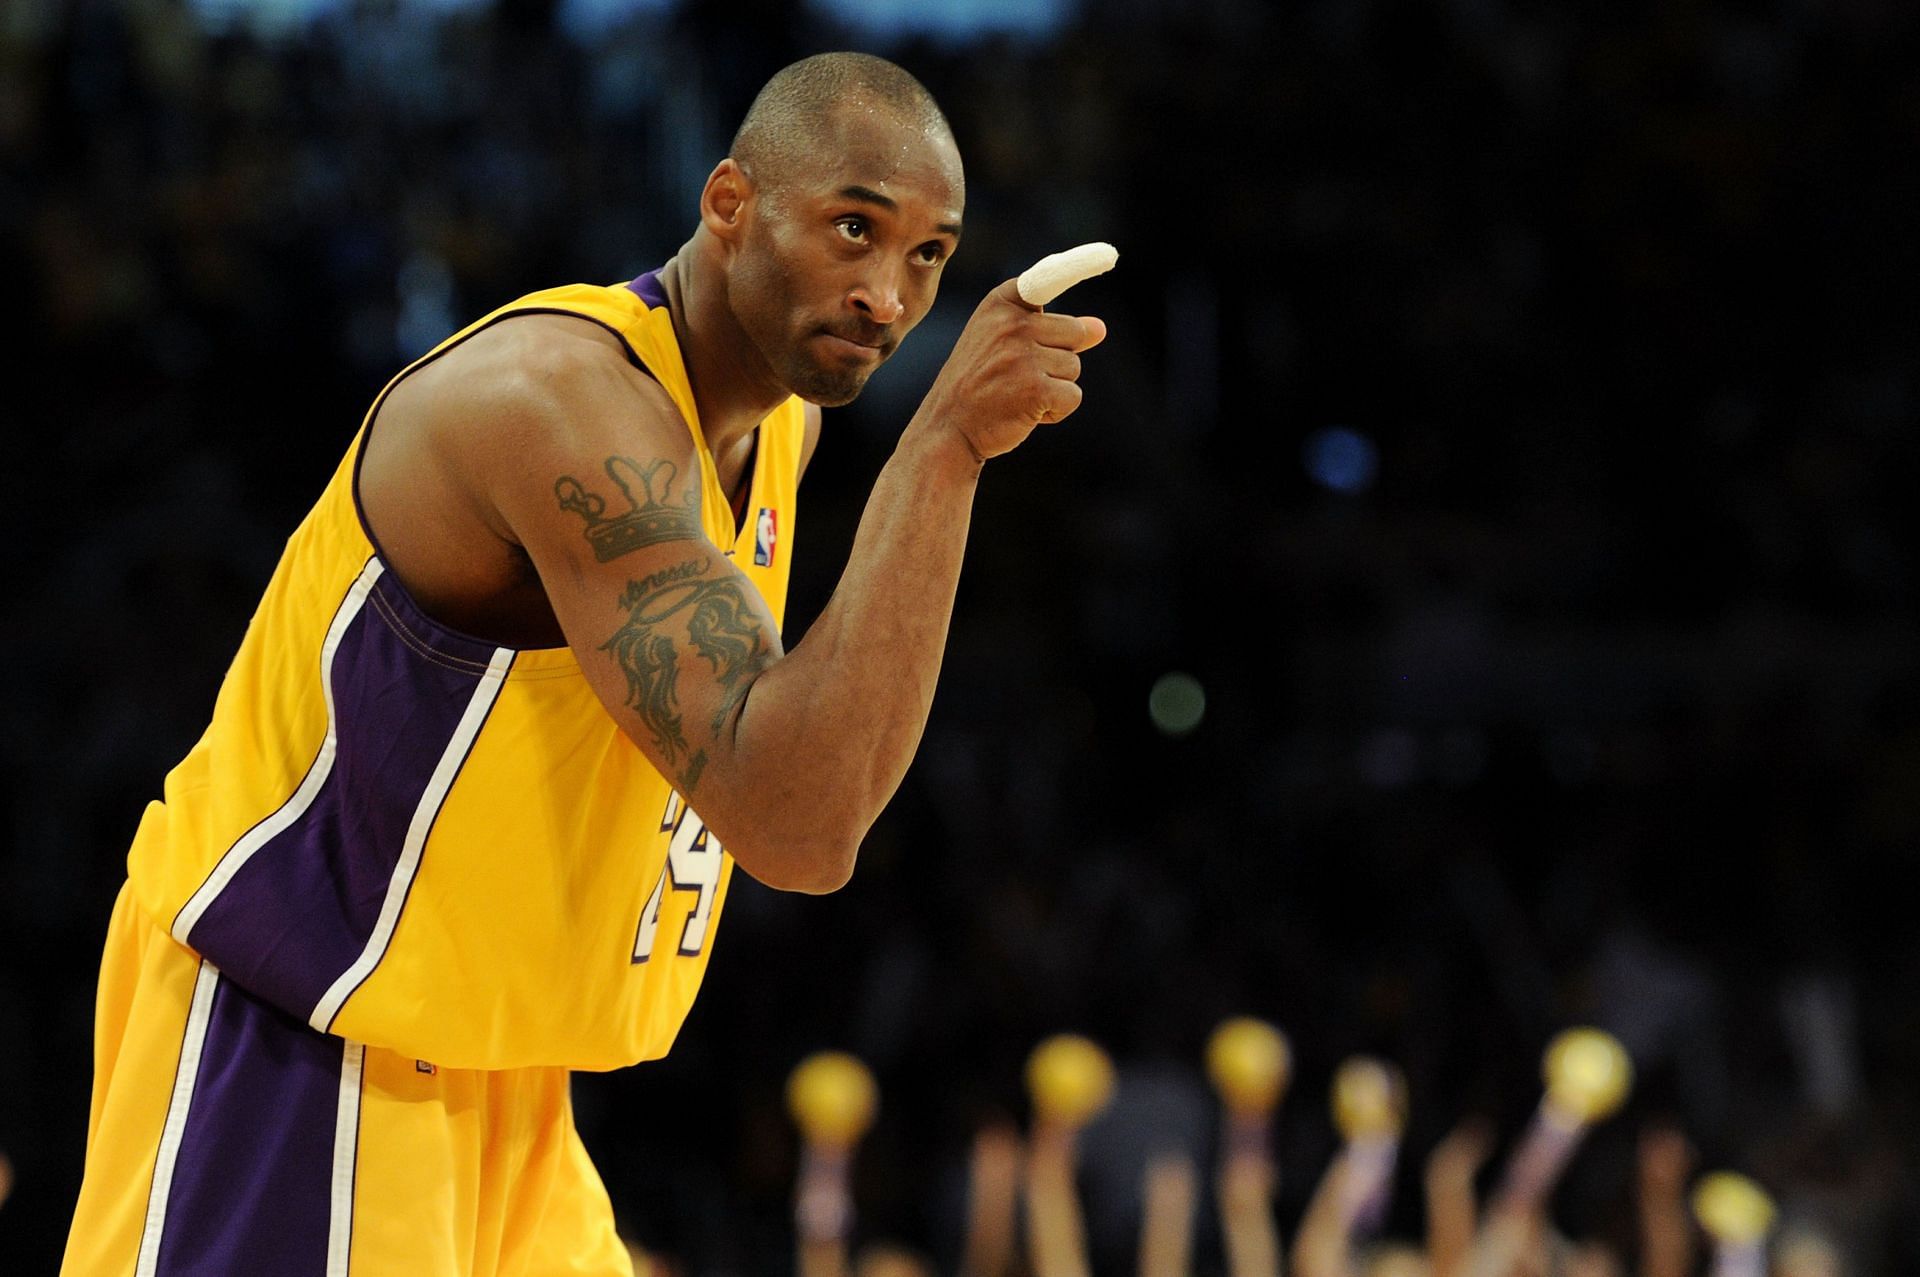 Kobe Bryant is the greatest player of his NBA Draft class (Image via Getty Images)